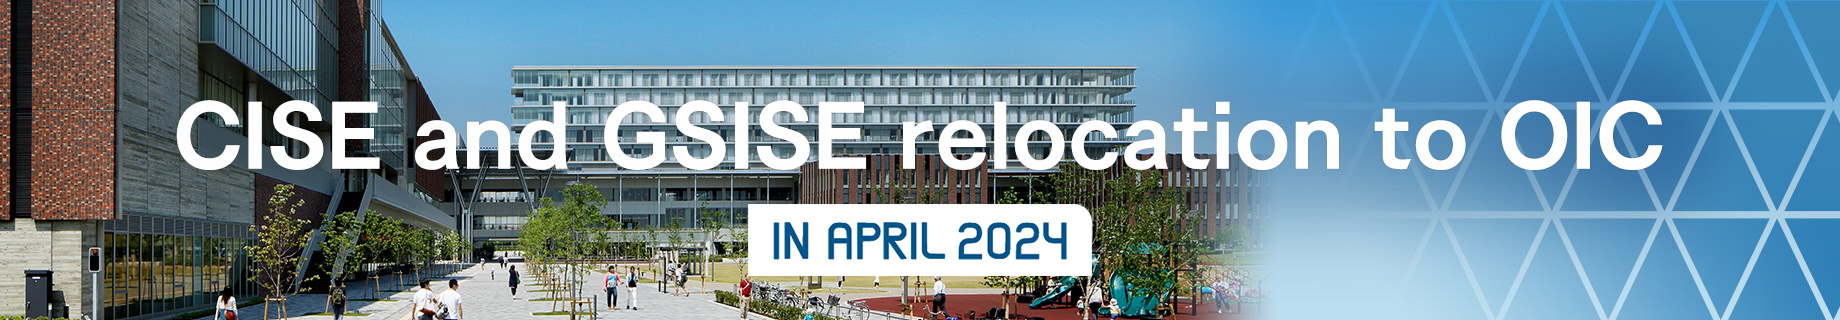 CISE and GSISE relocation to OIC in April 2024